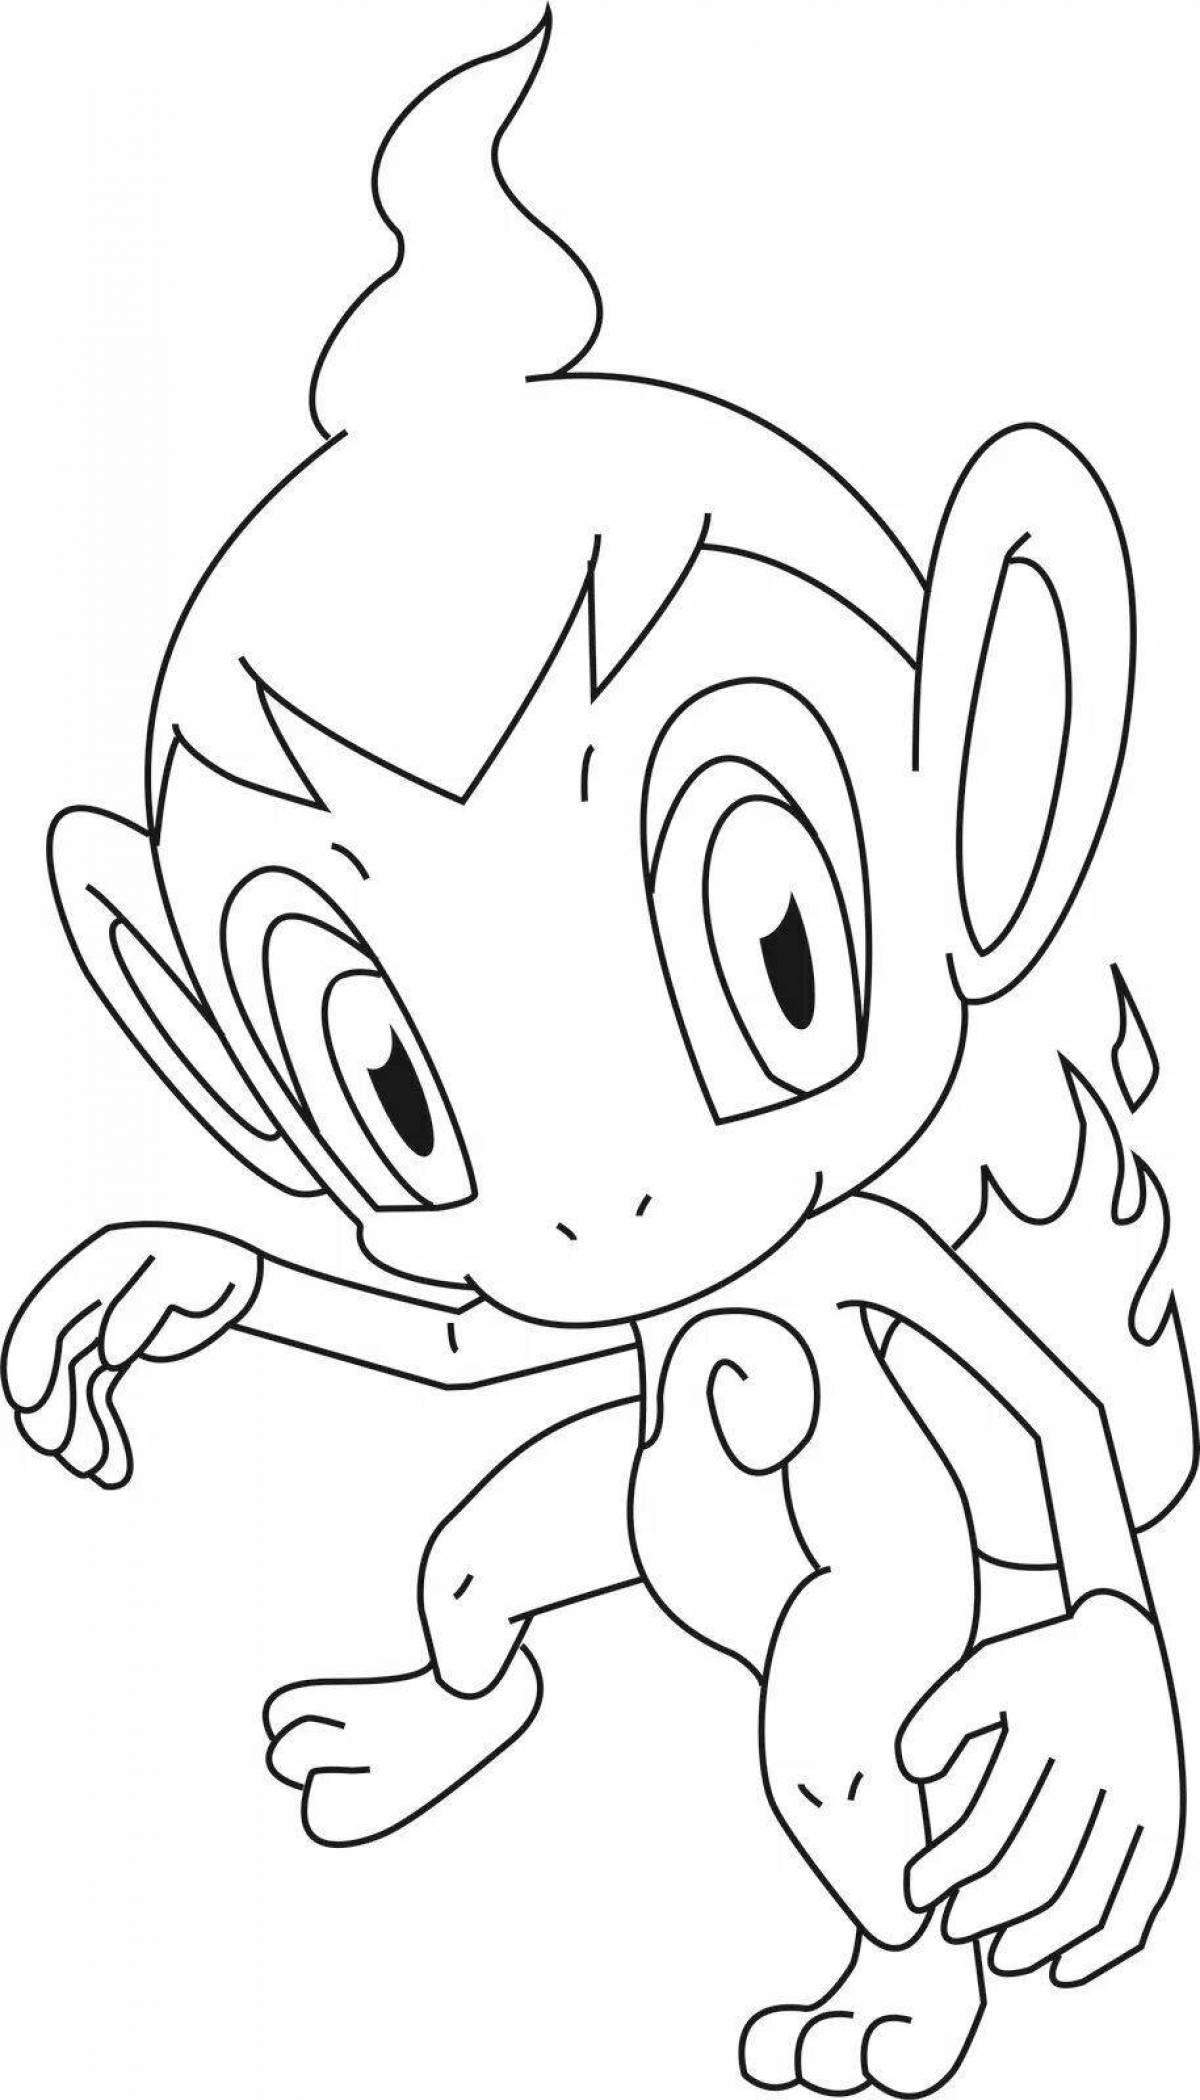 Colorful chimchar coloring page